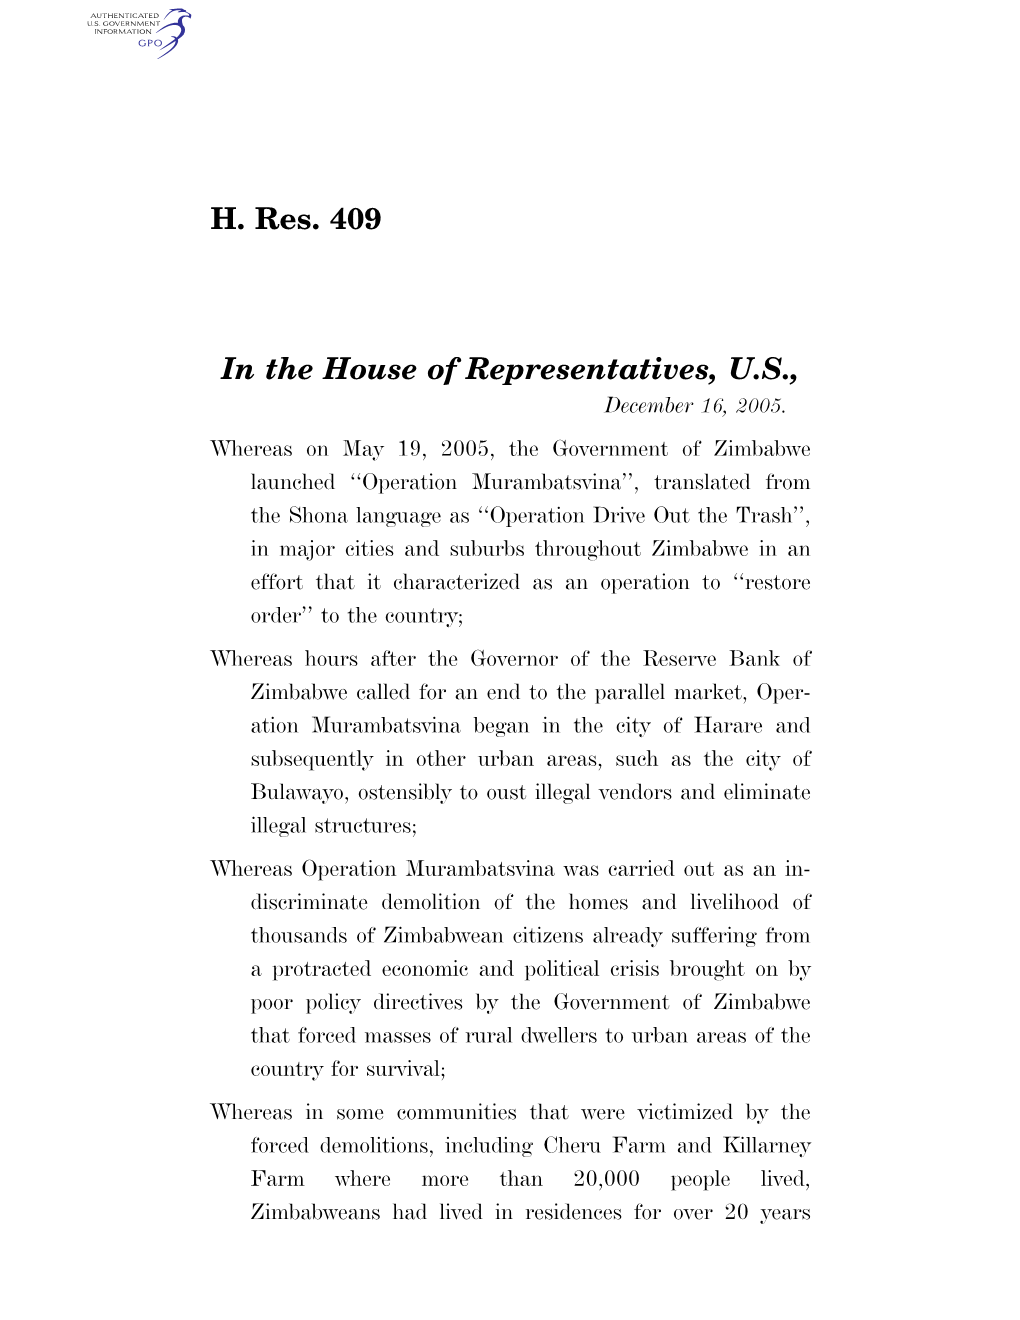 H. Res. 409 in the House of Representatives, U.S